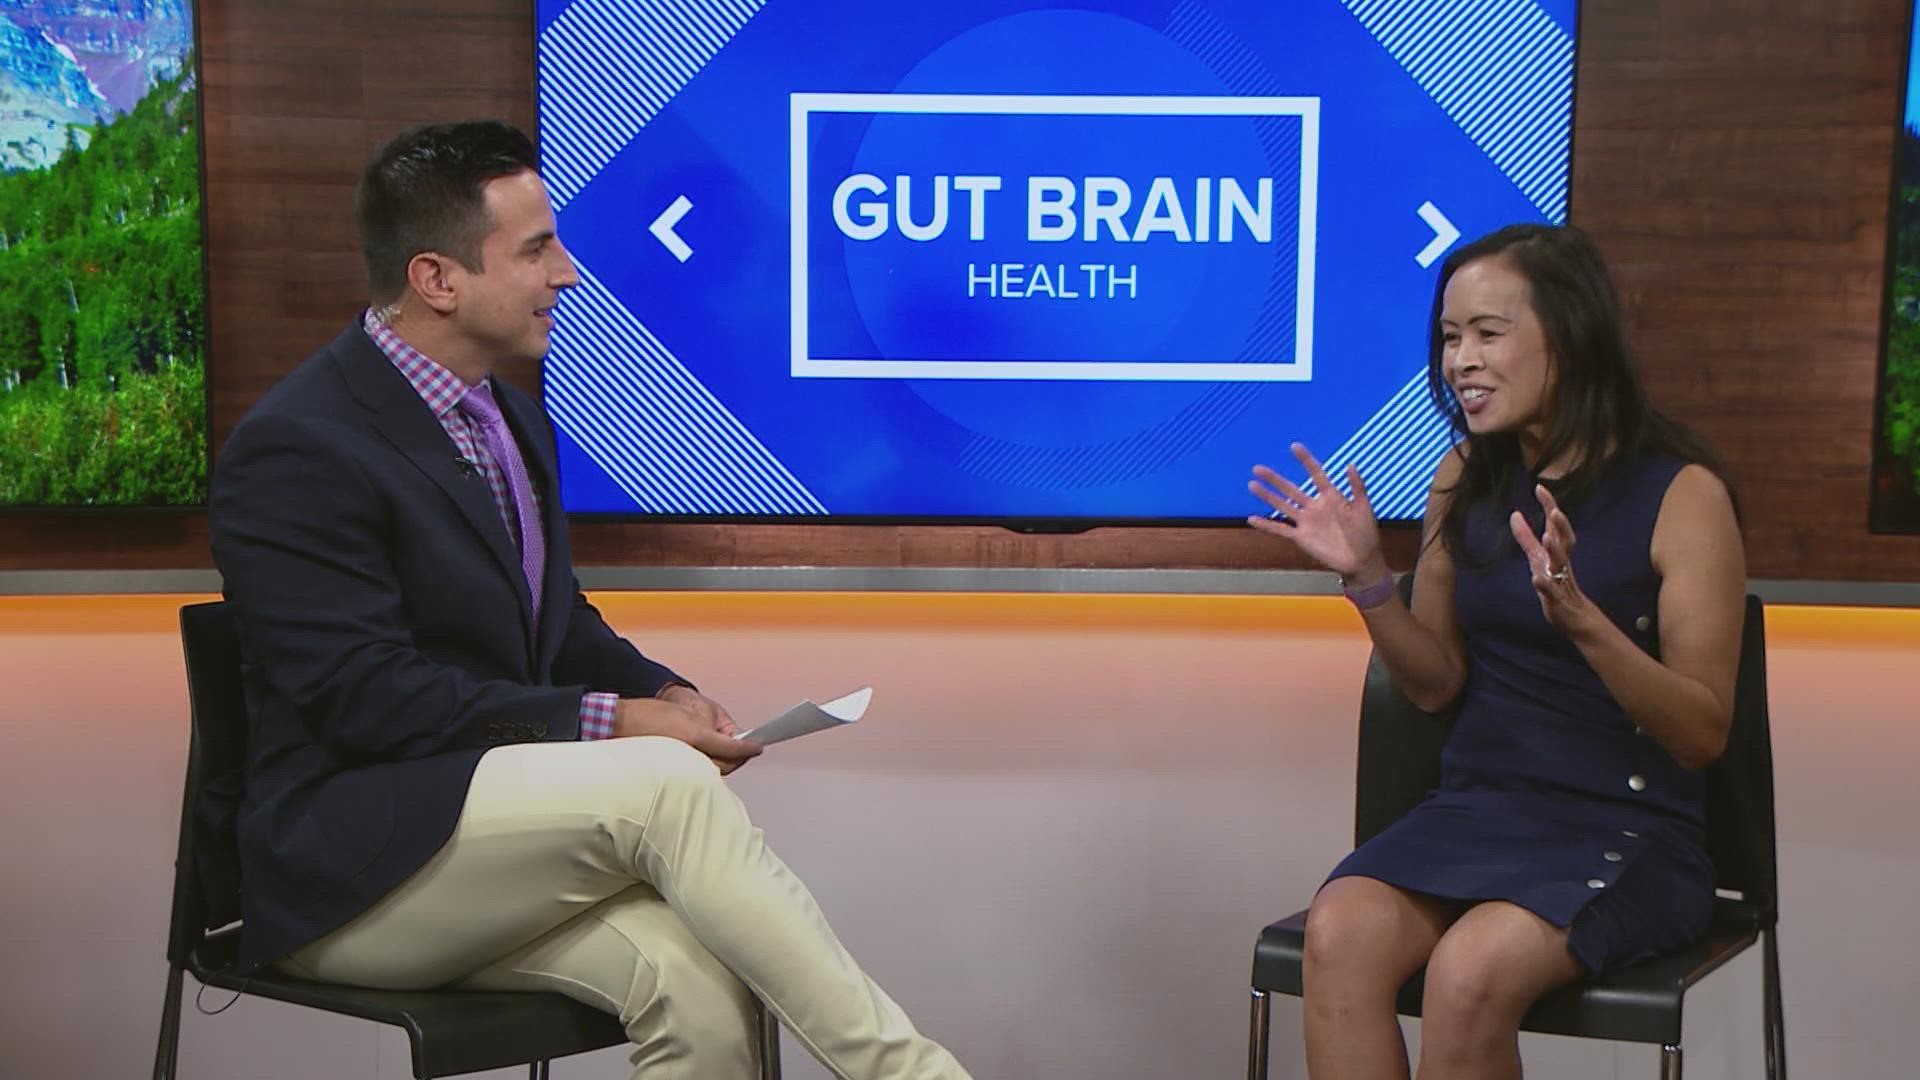 Dr. Angela Tran talks about how to strengthen your gut-brain health.